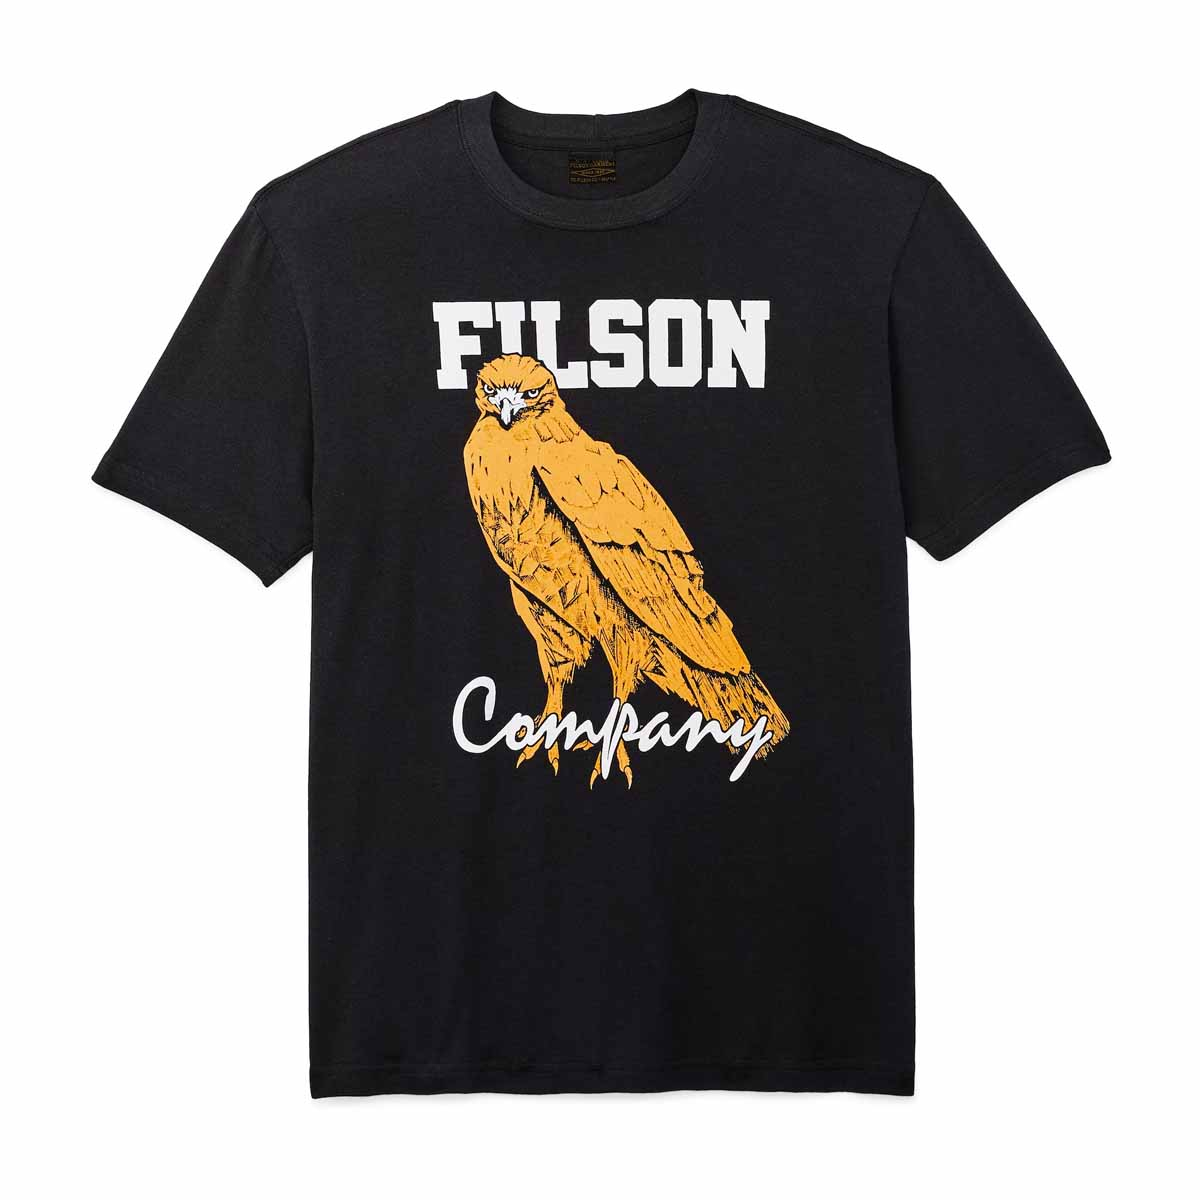 Filson Pioneer Graphic T-Shirt Black/Bird of Grey, a heavy-duty shirt with  a comfortable feel